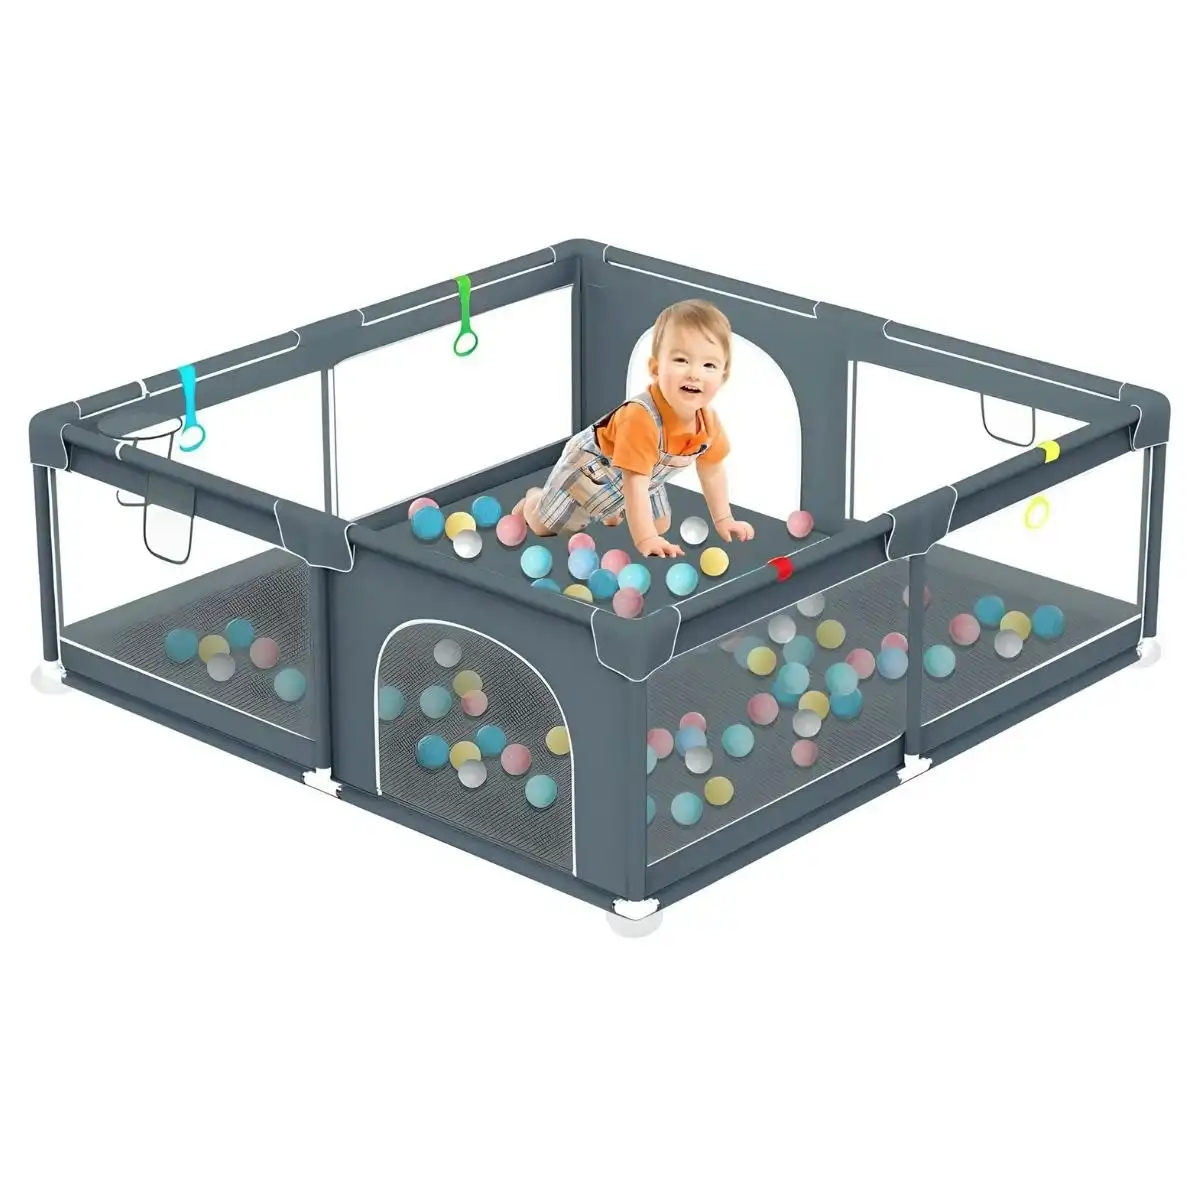 Toddly Explorer Max Baby Play Pen Safe, Stylish & Spacious for Your Child